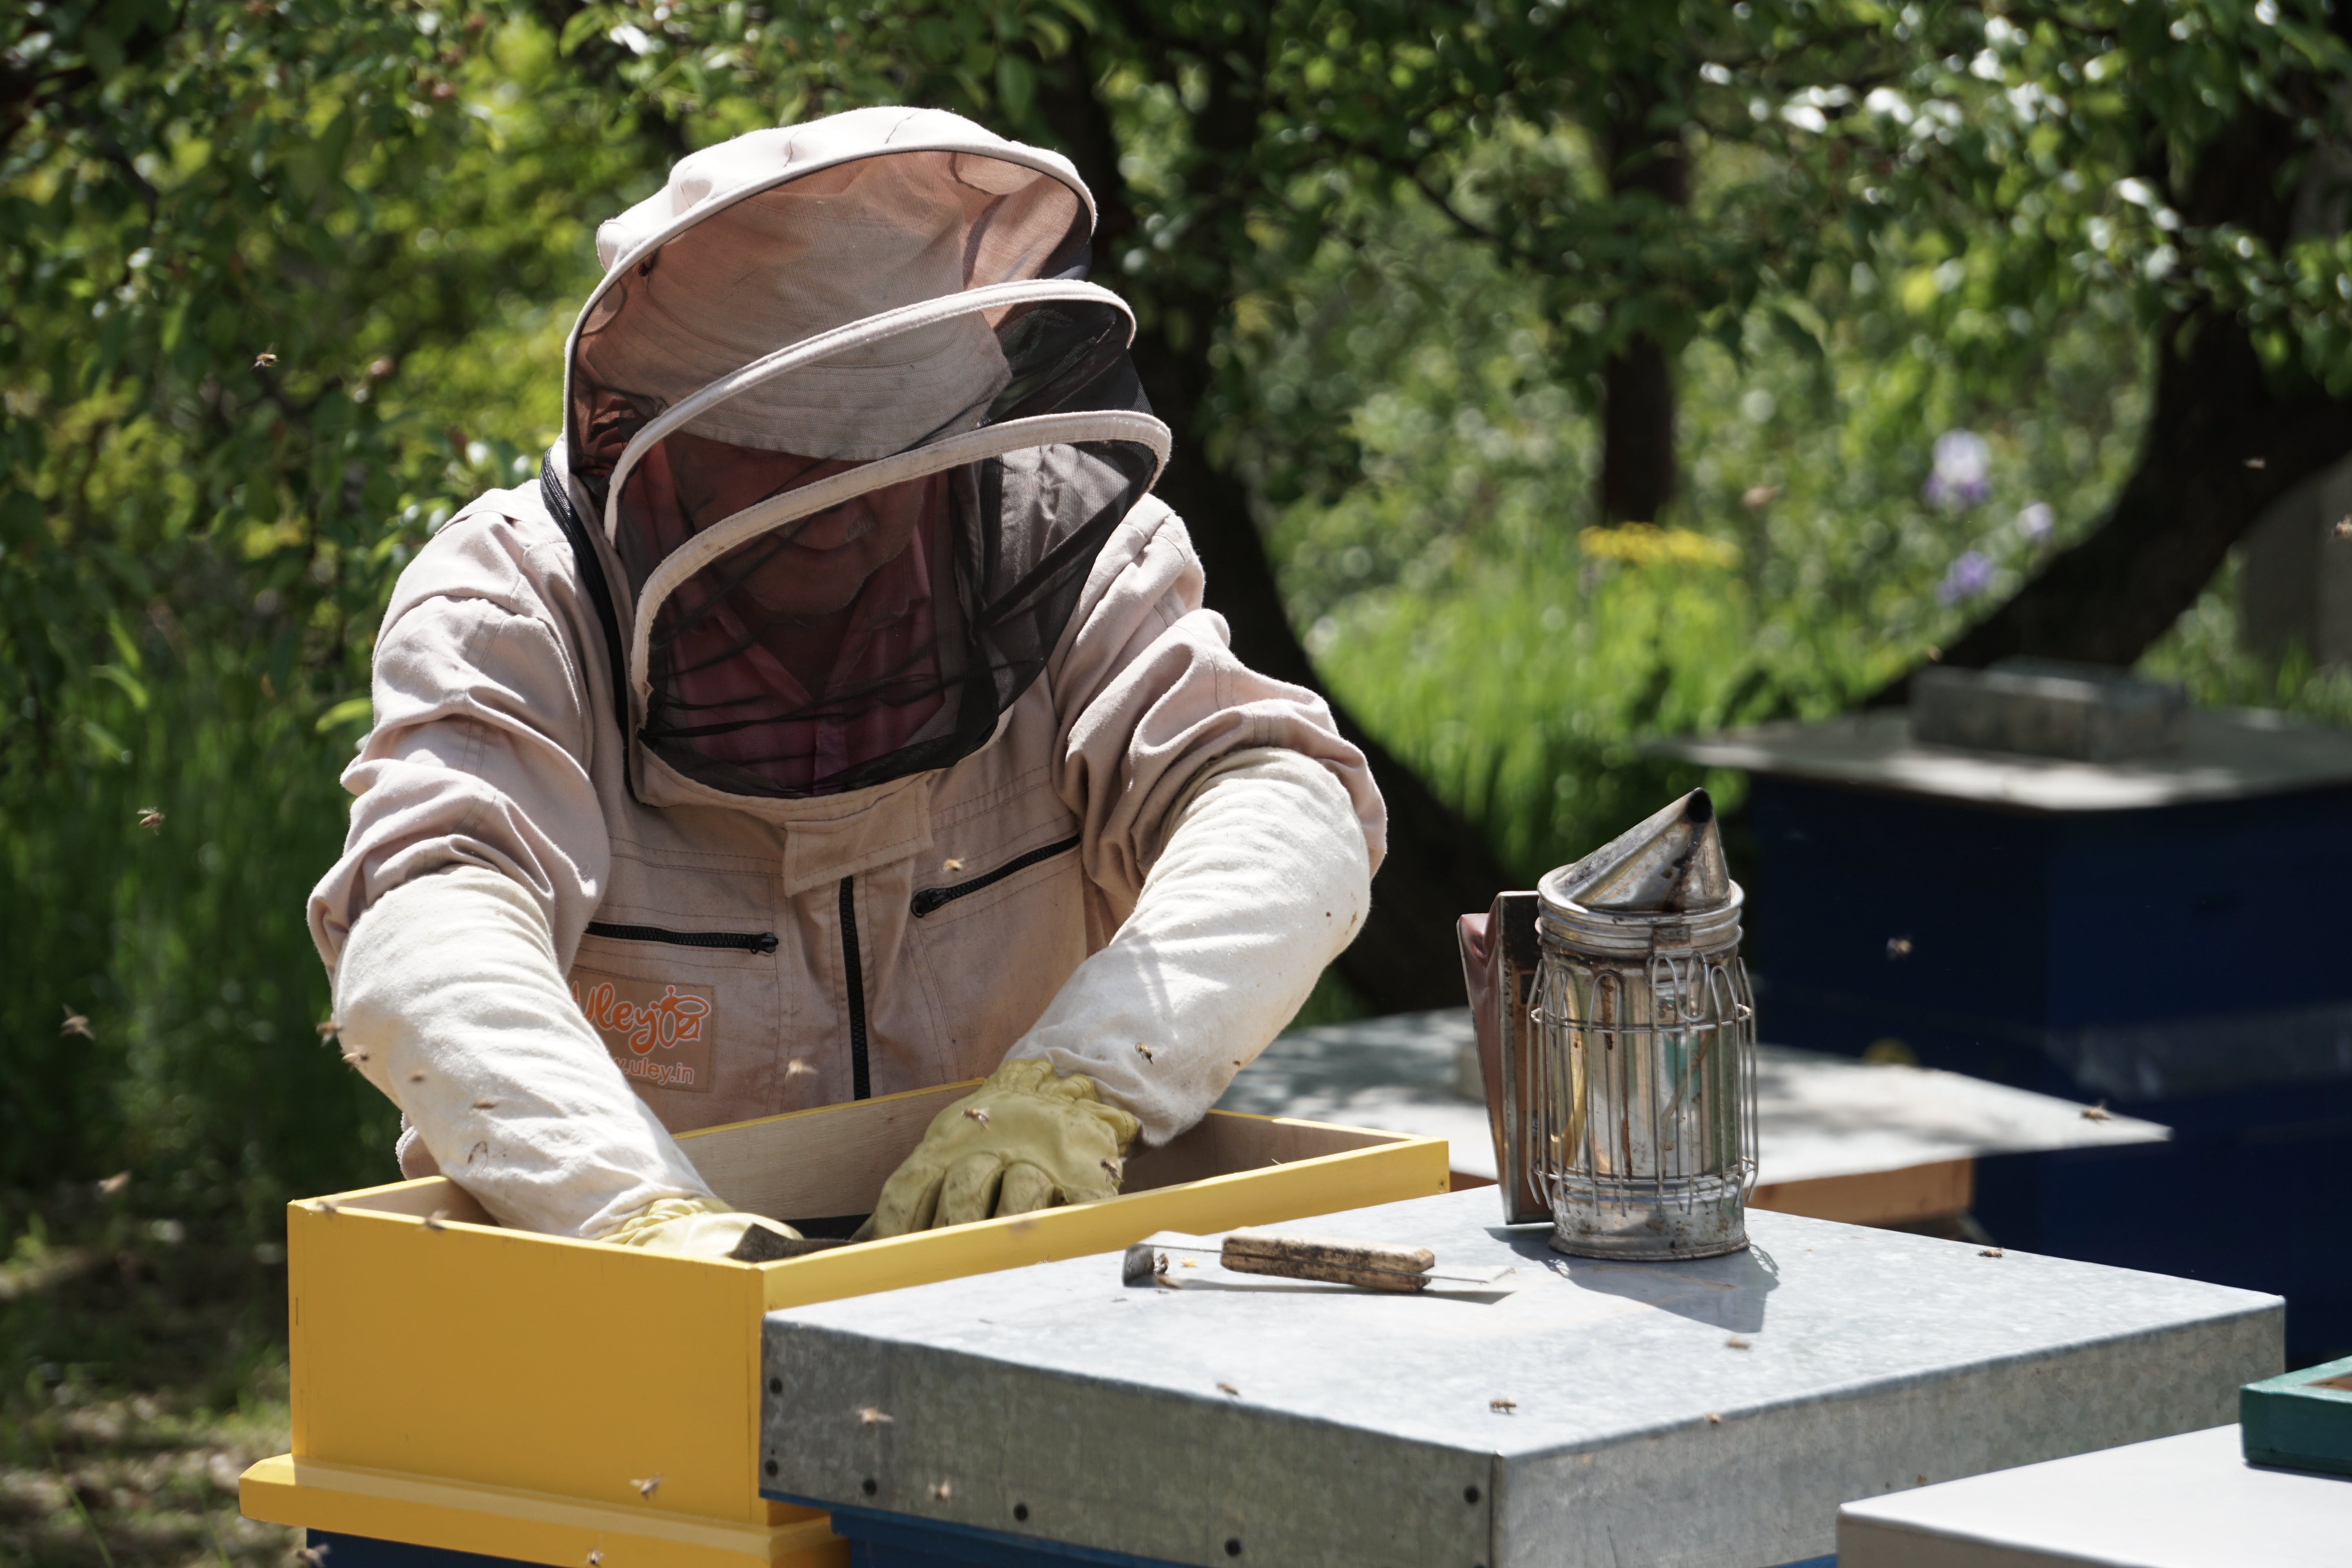 Beekeeper inspecting honeycomb frames at an apiary with a smoker tool in foreground